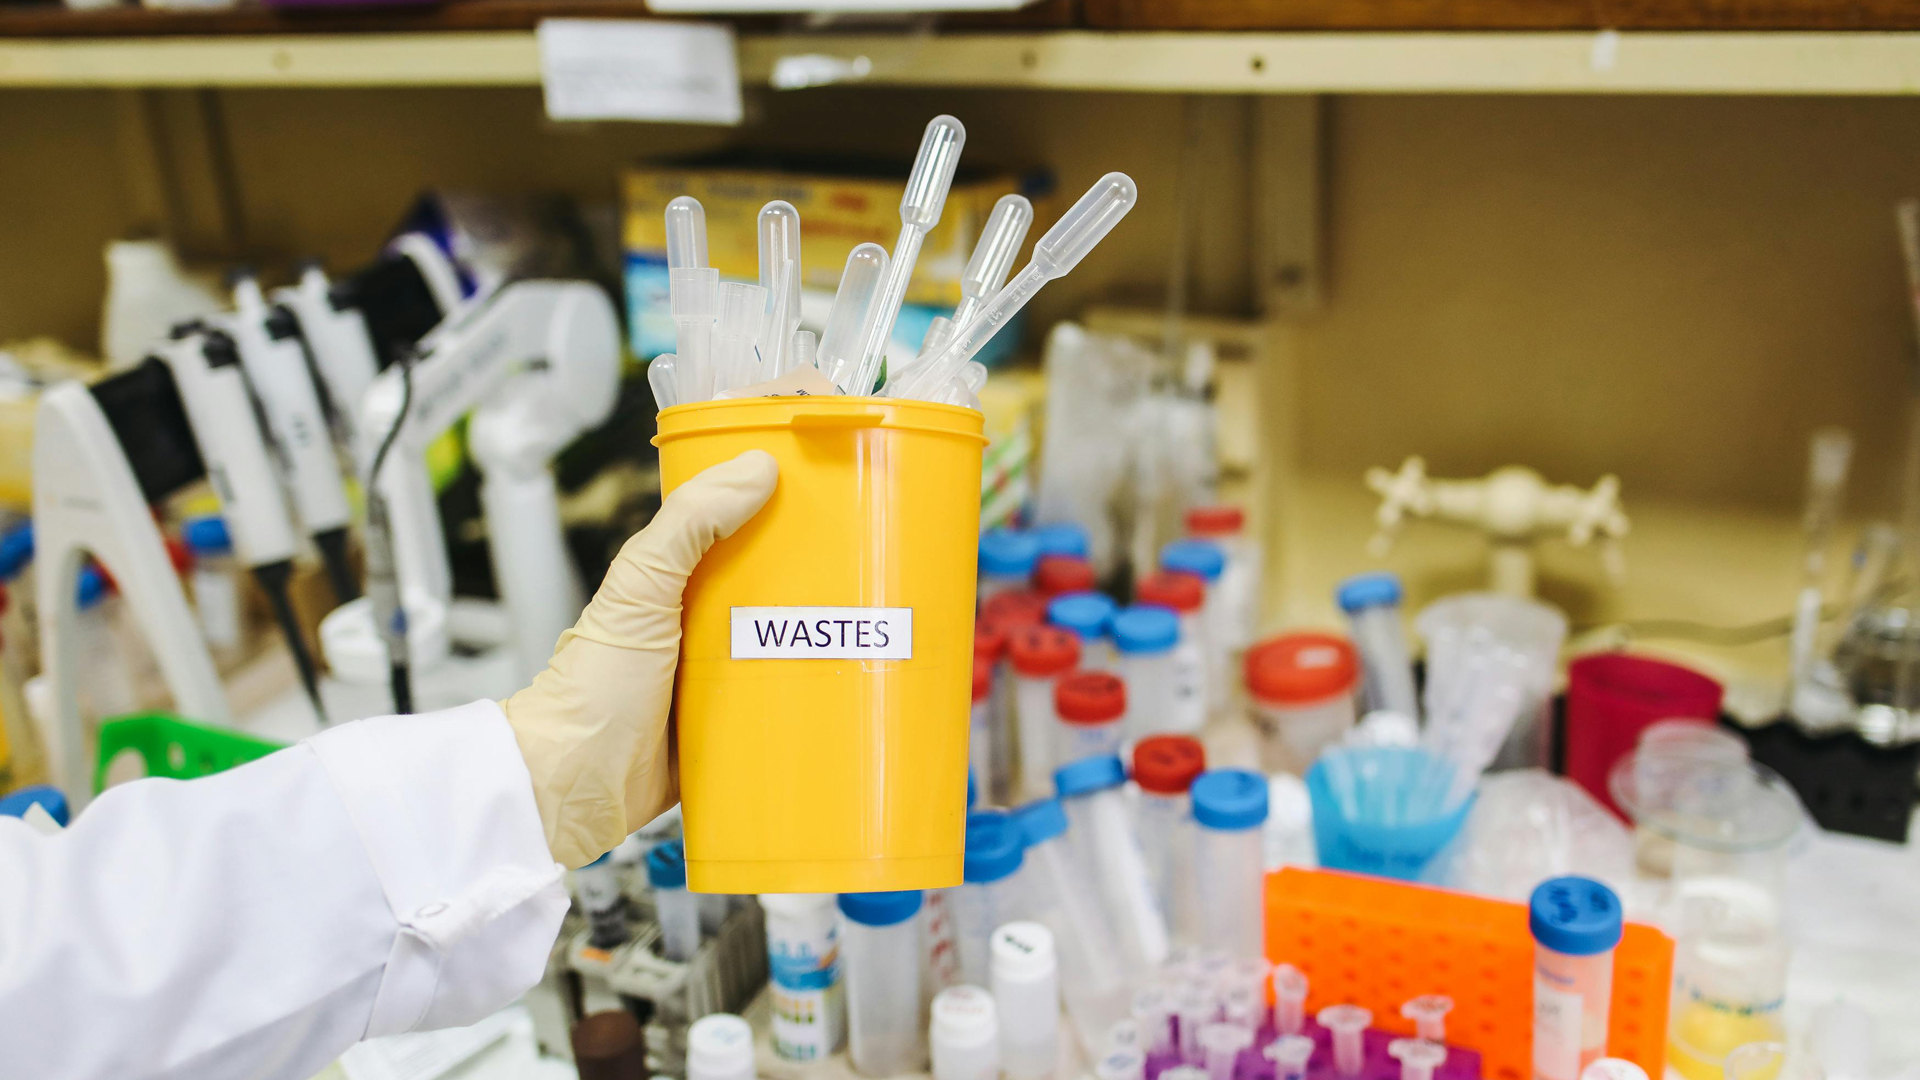 An arm and hand wearing a lab coat and rubber glove holding a yellow container labelled waste full of plastic liquid droppers infron of medical research tubes and containers